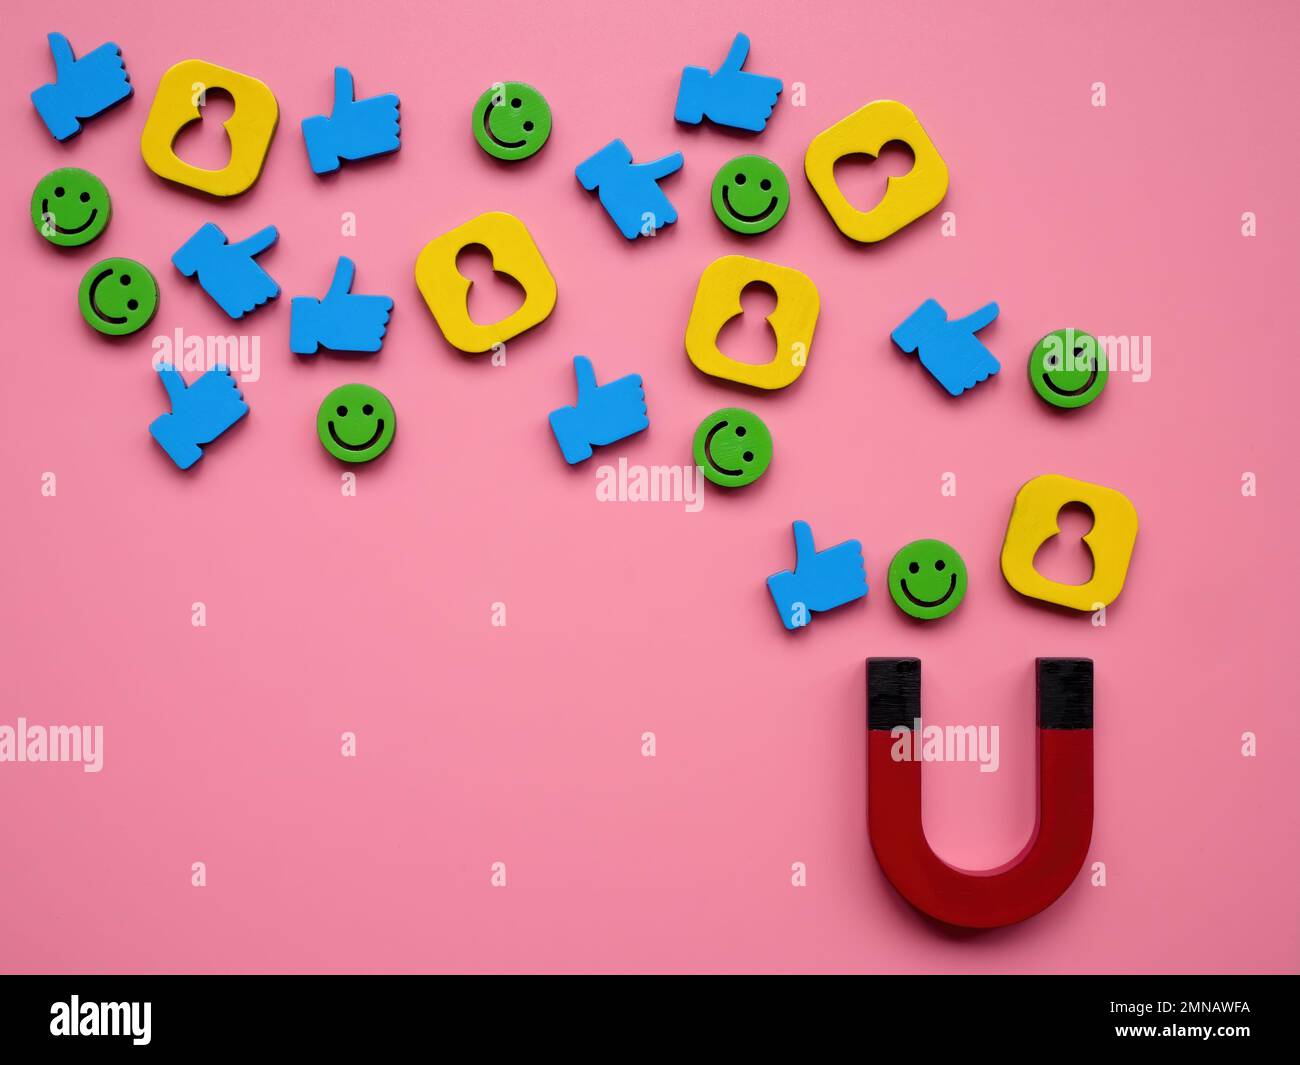 The lead magnet attracts likes and smile emoticons. Stock Photo